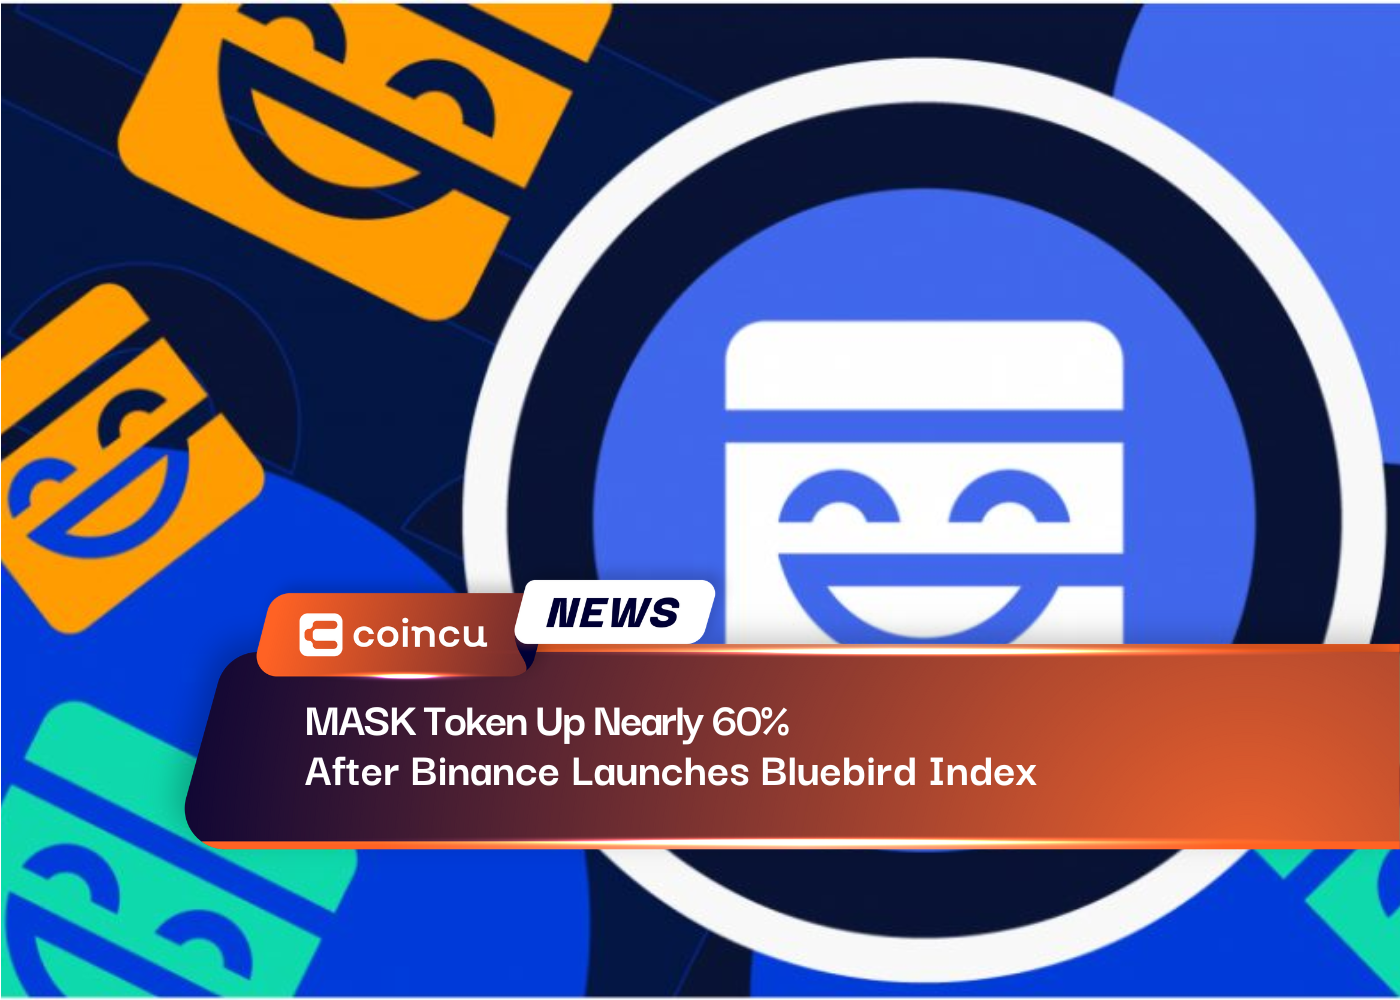 MASK Token Up Nearly 60% After Binance Launches Bluebird Index